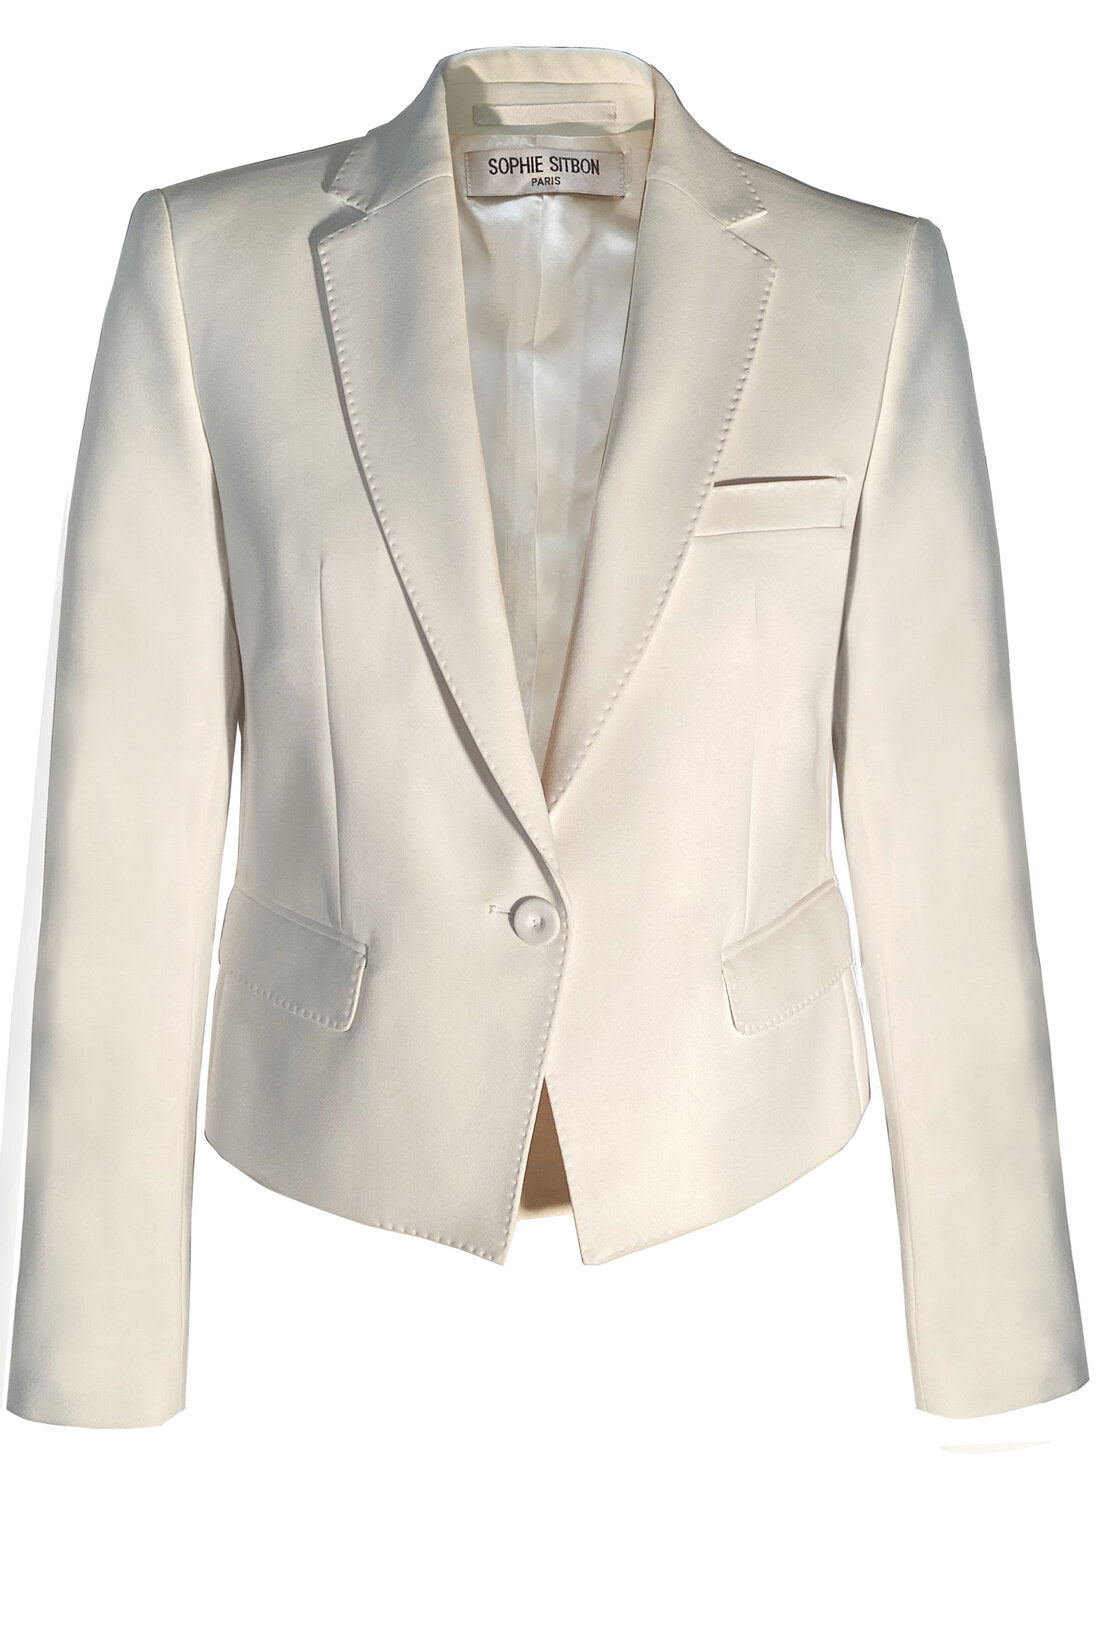 CROPPED JACKET IN IVORY HEAVY CREPE 